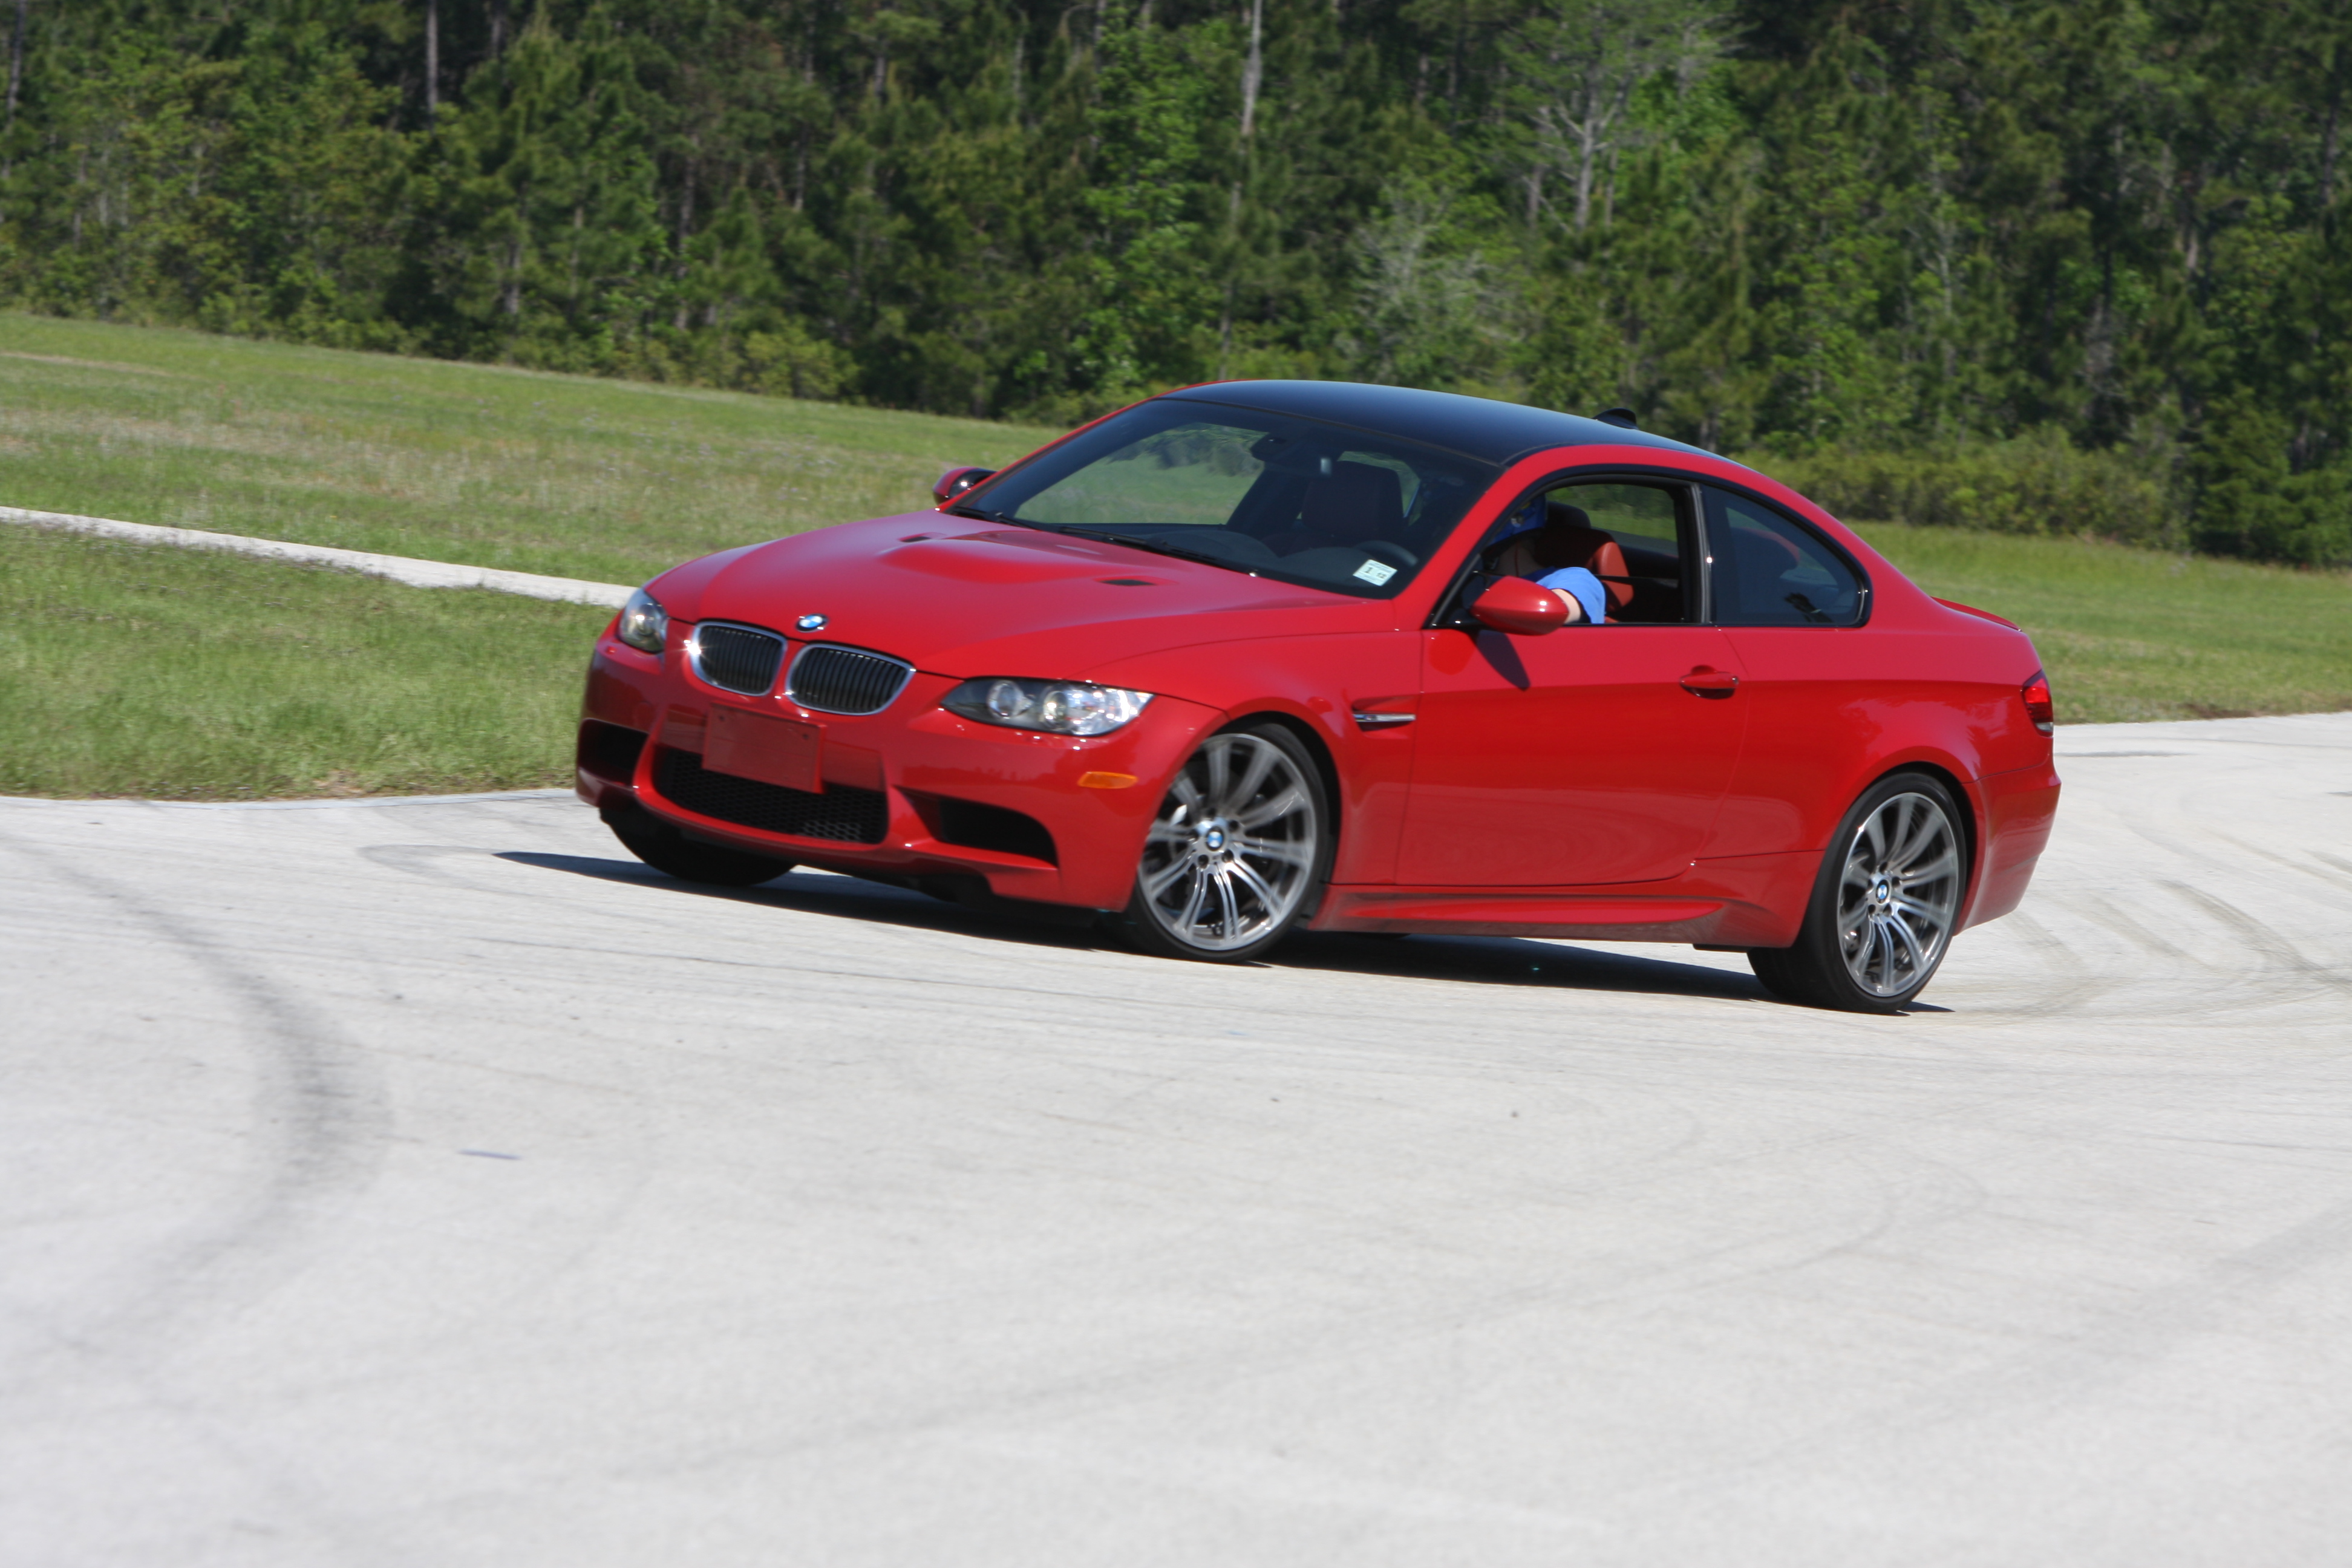 2008 Bmw m3 coupe review #4